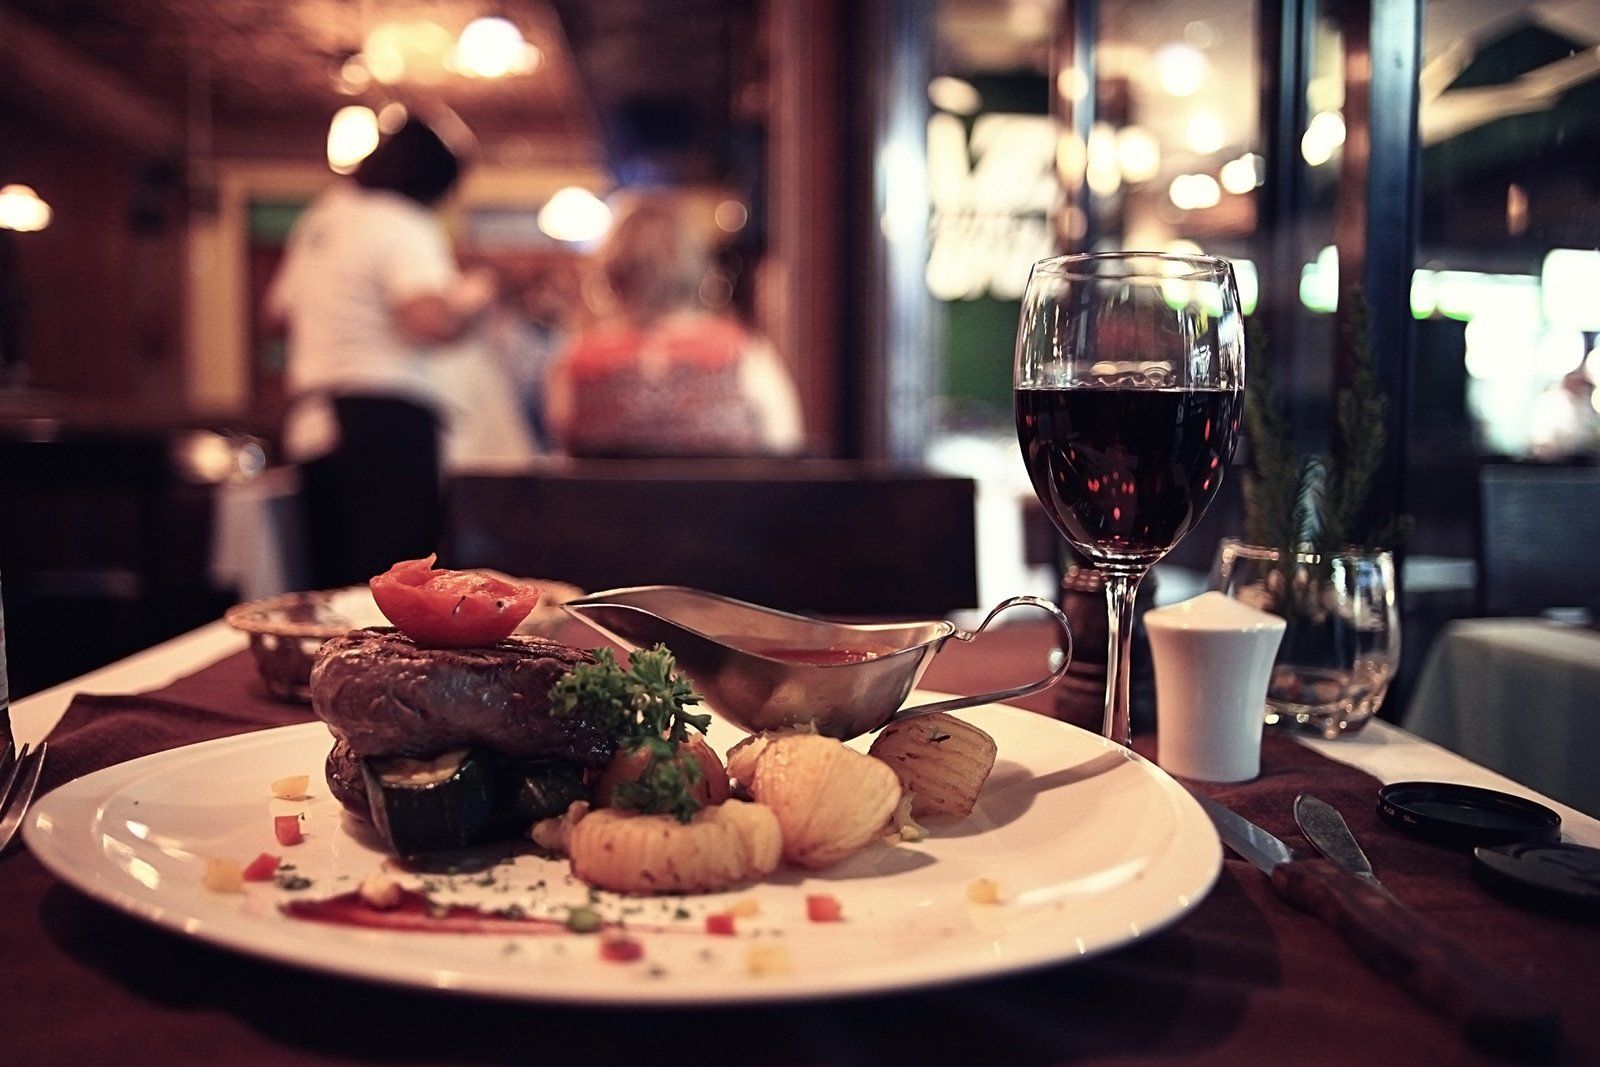 A plate of food and a glass of wine on a table in a restaurant.